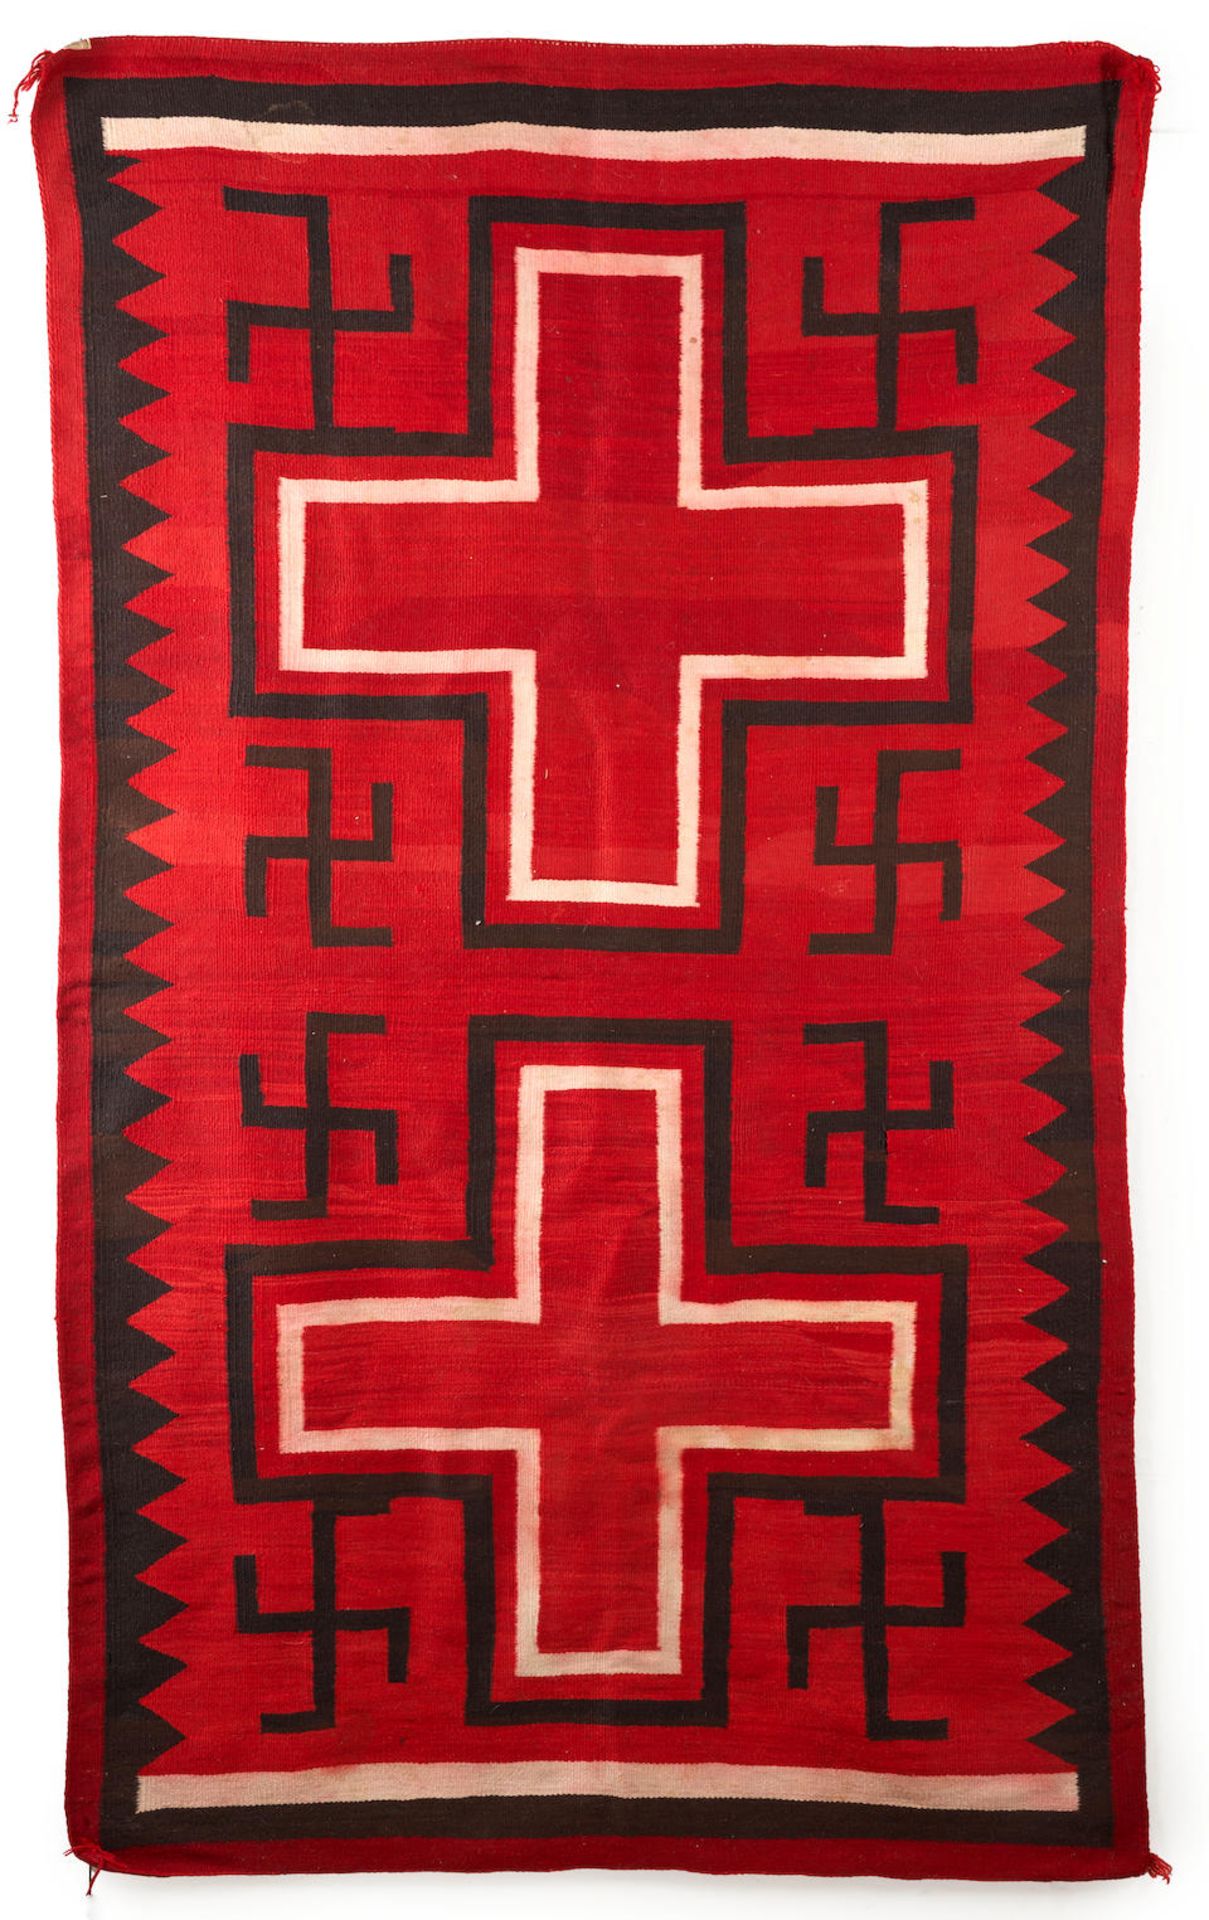 A large Diné (Navajo) Rug 89 x 53 1/2 in.